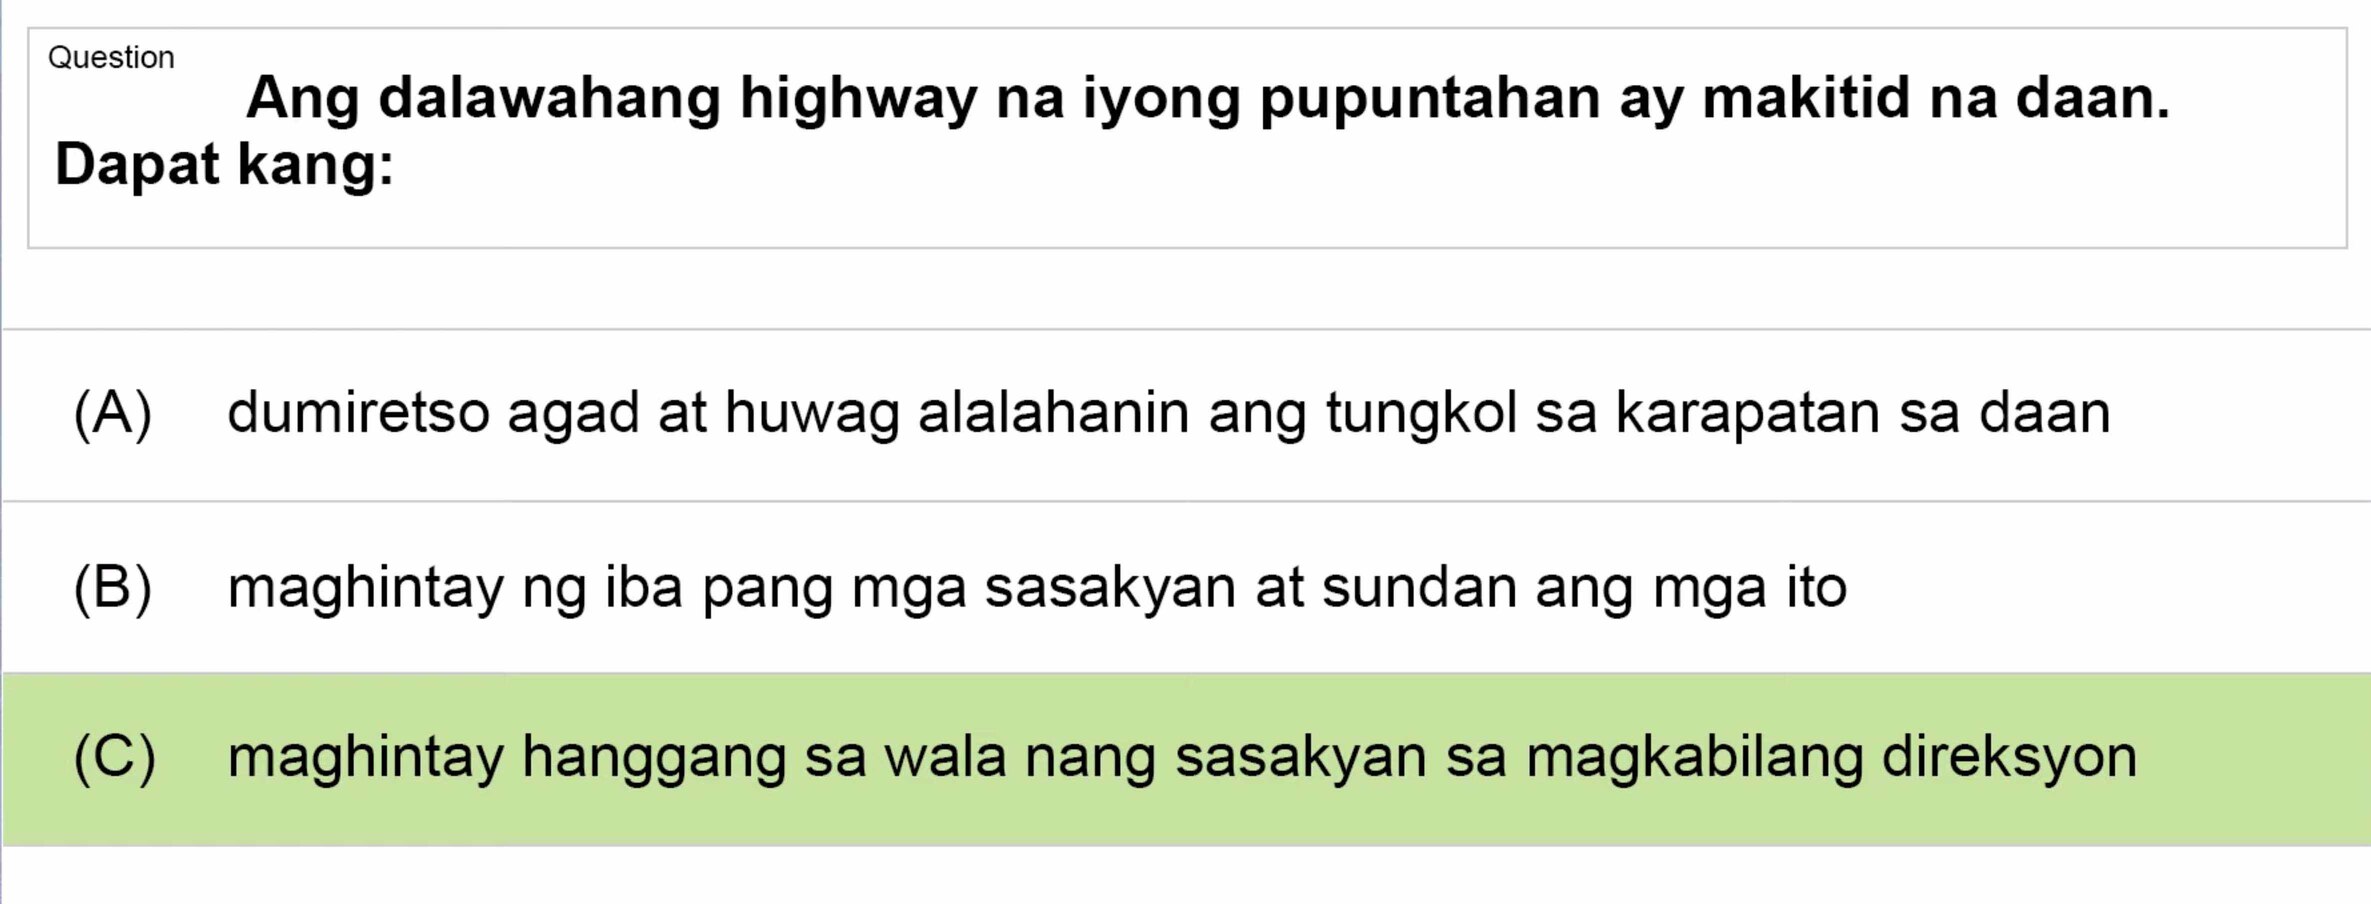 LTO Tagalog non professional exam reviewer light vehicle 3 (56)